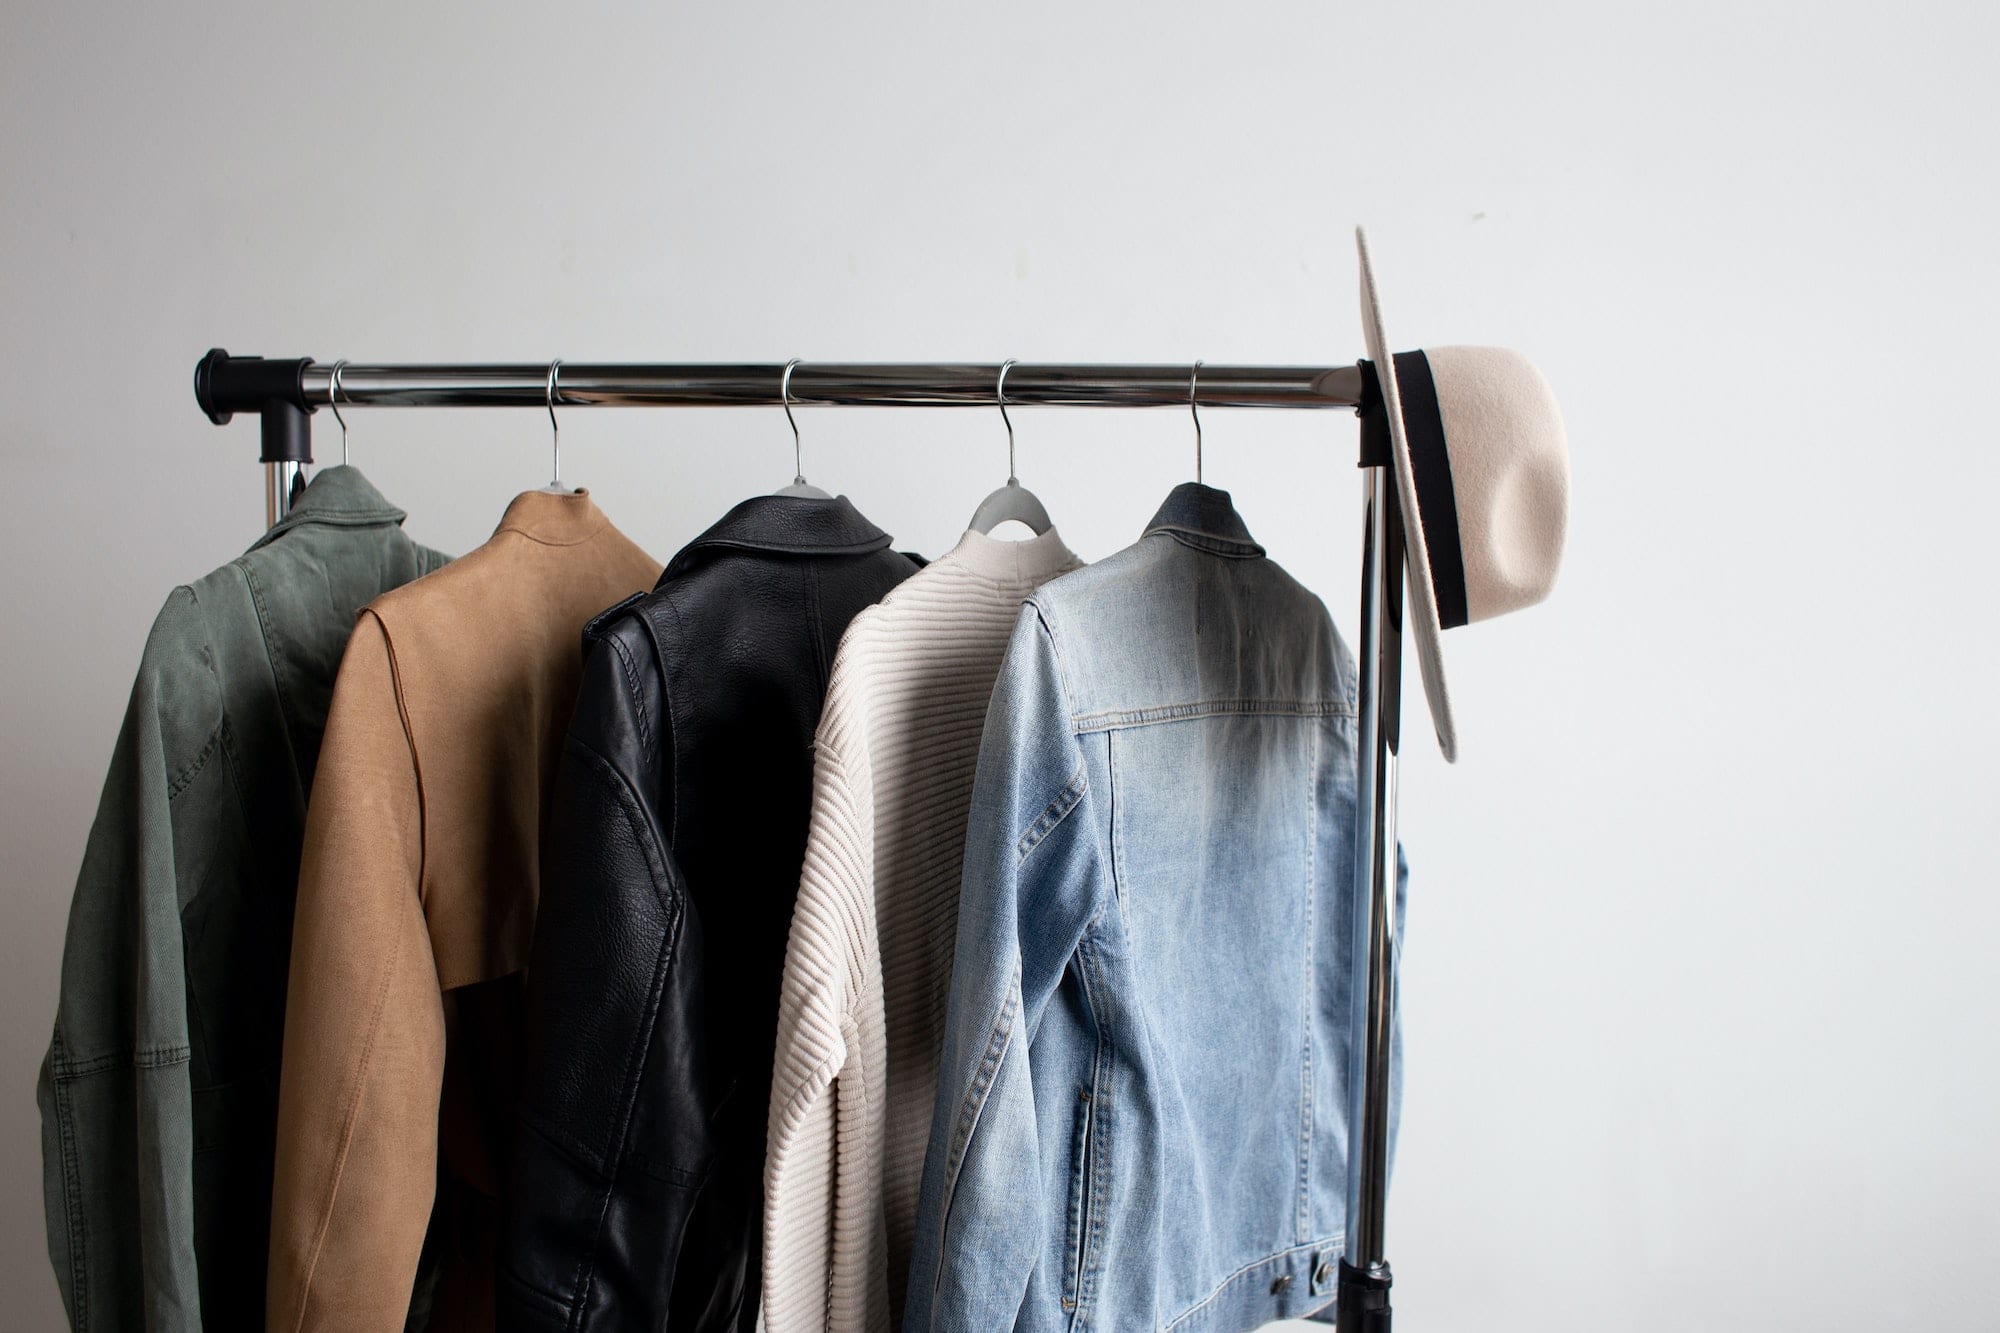 How to plan a capsule wardrobe